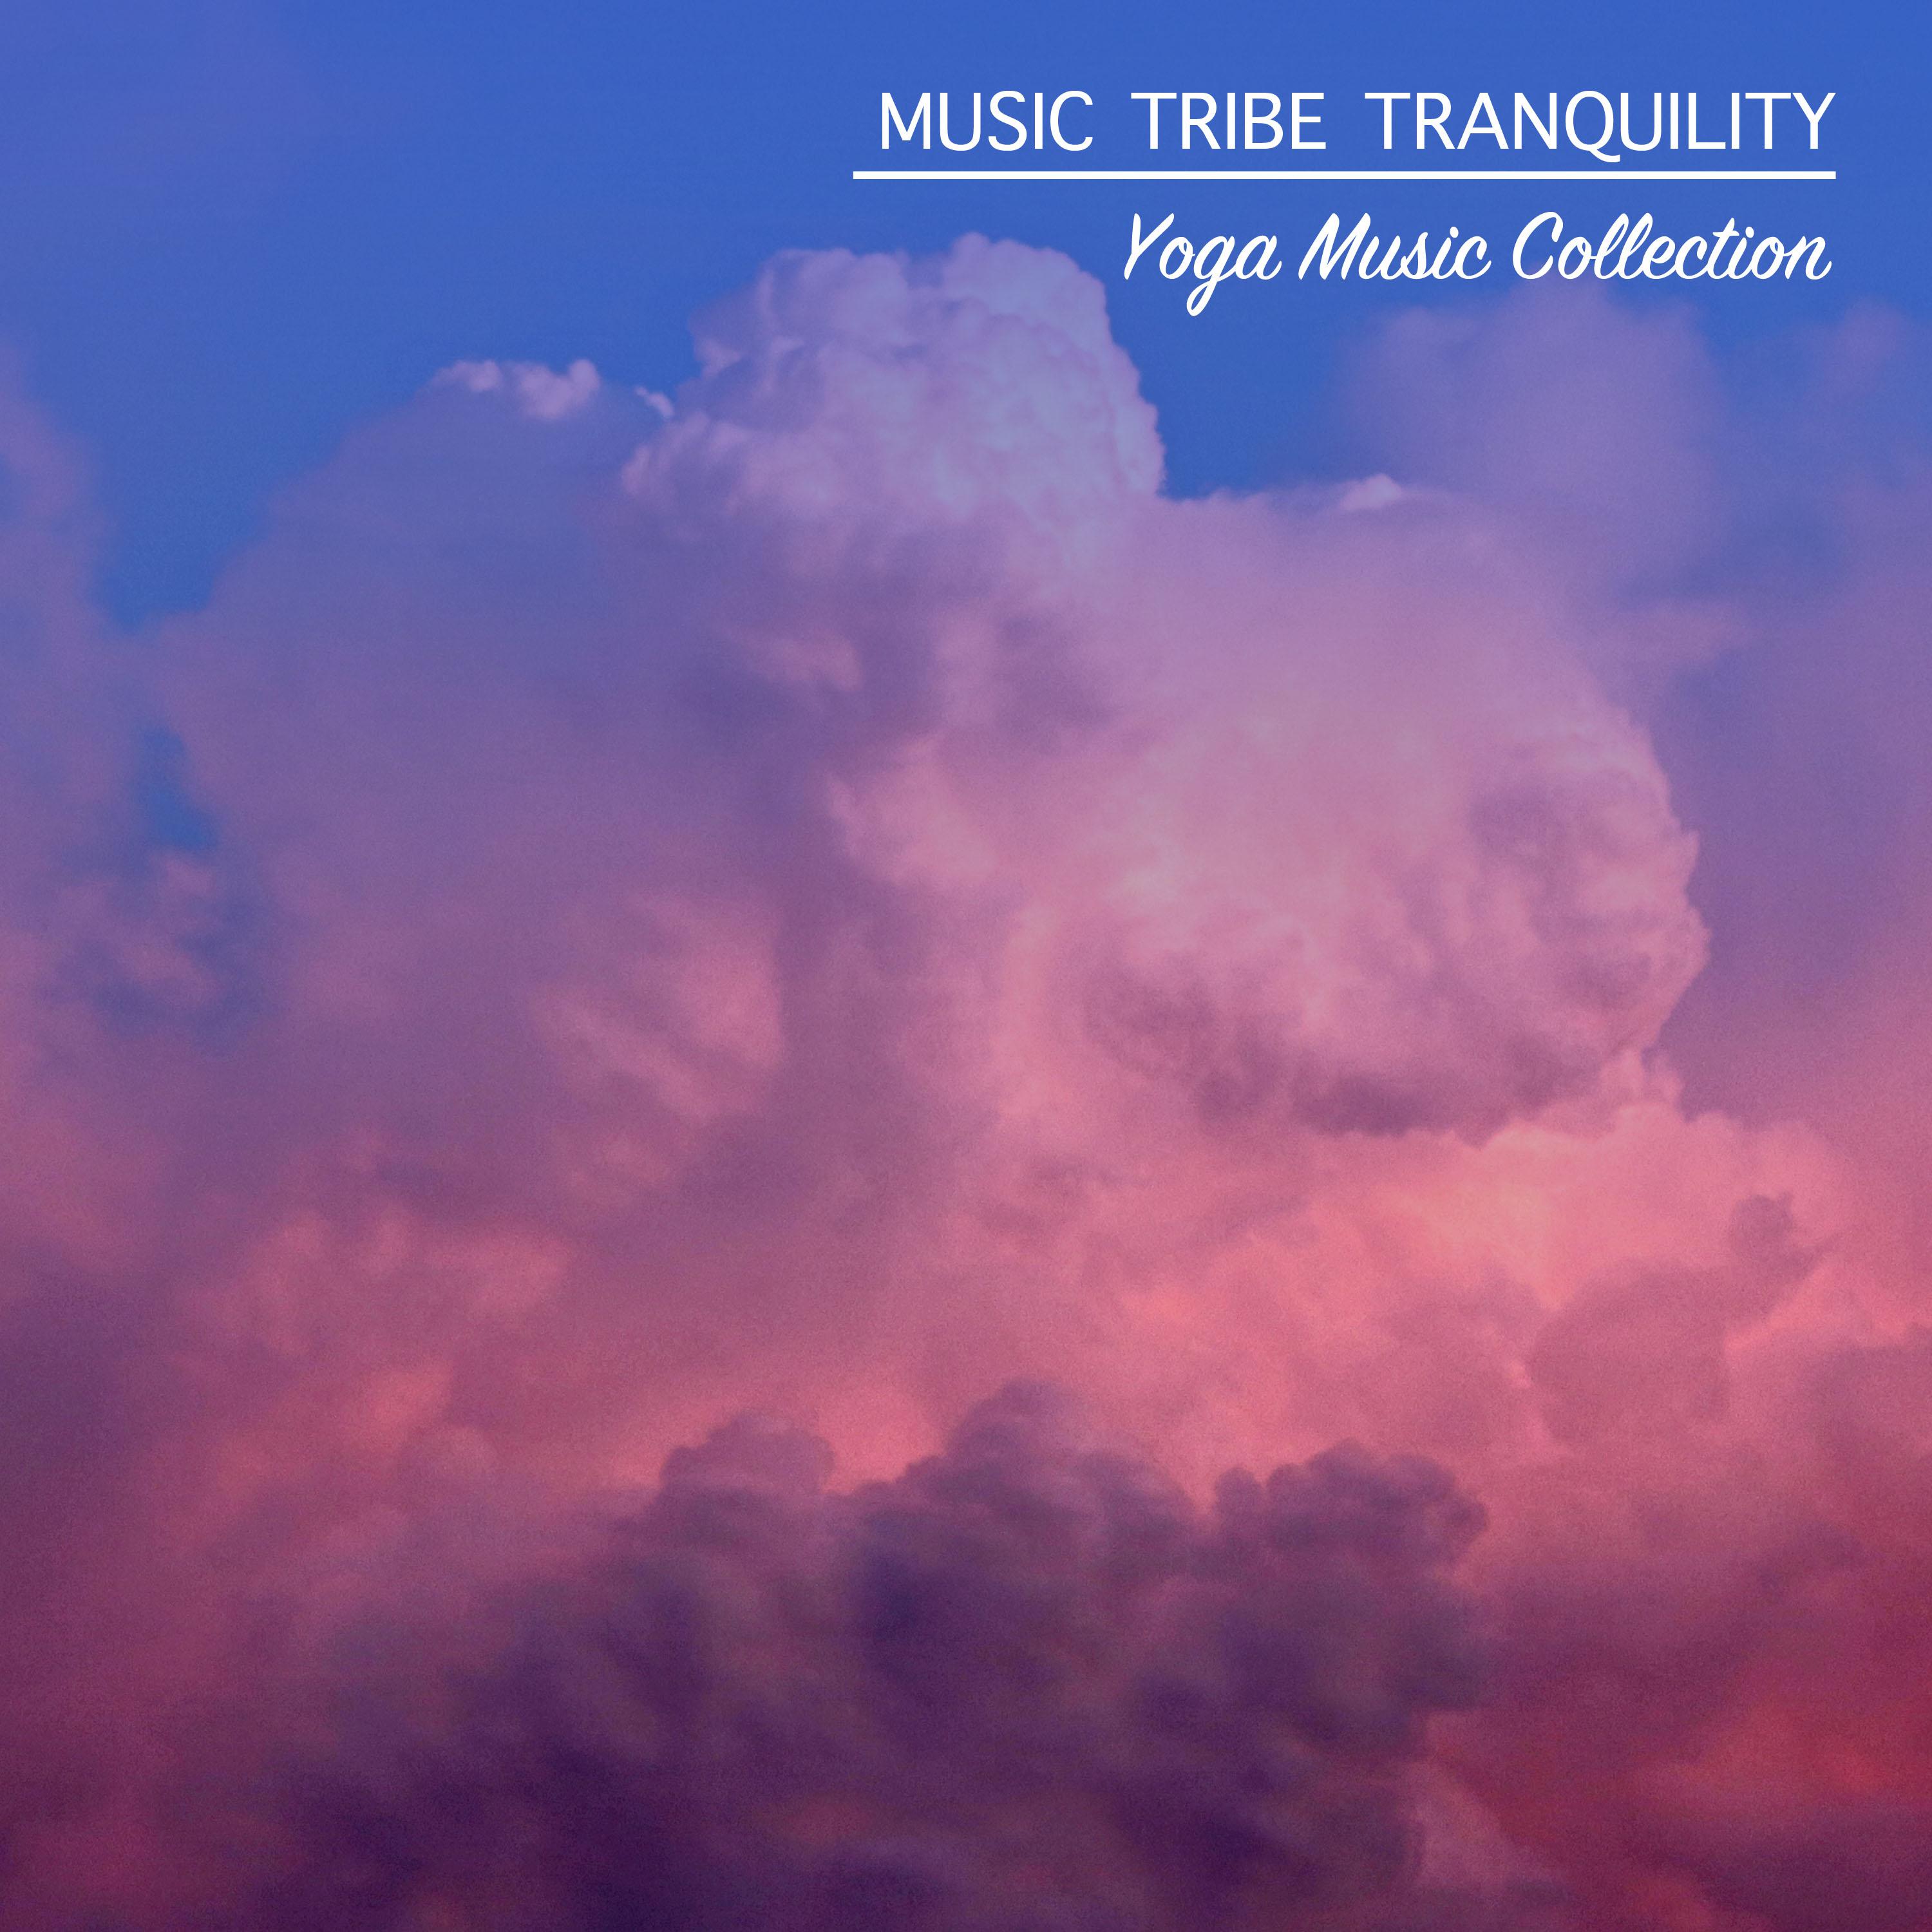 2018 A Yoga Music Collection: Music Tribe Tranquility